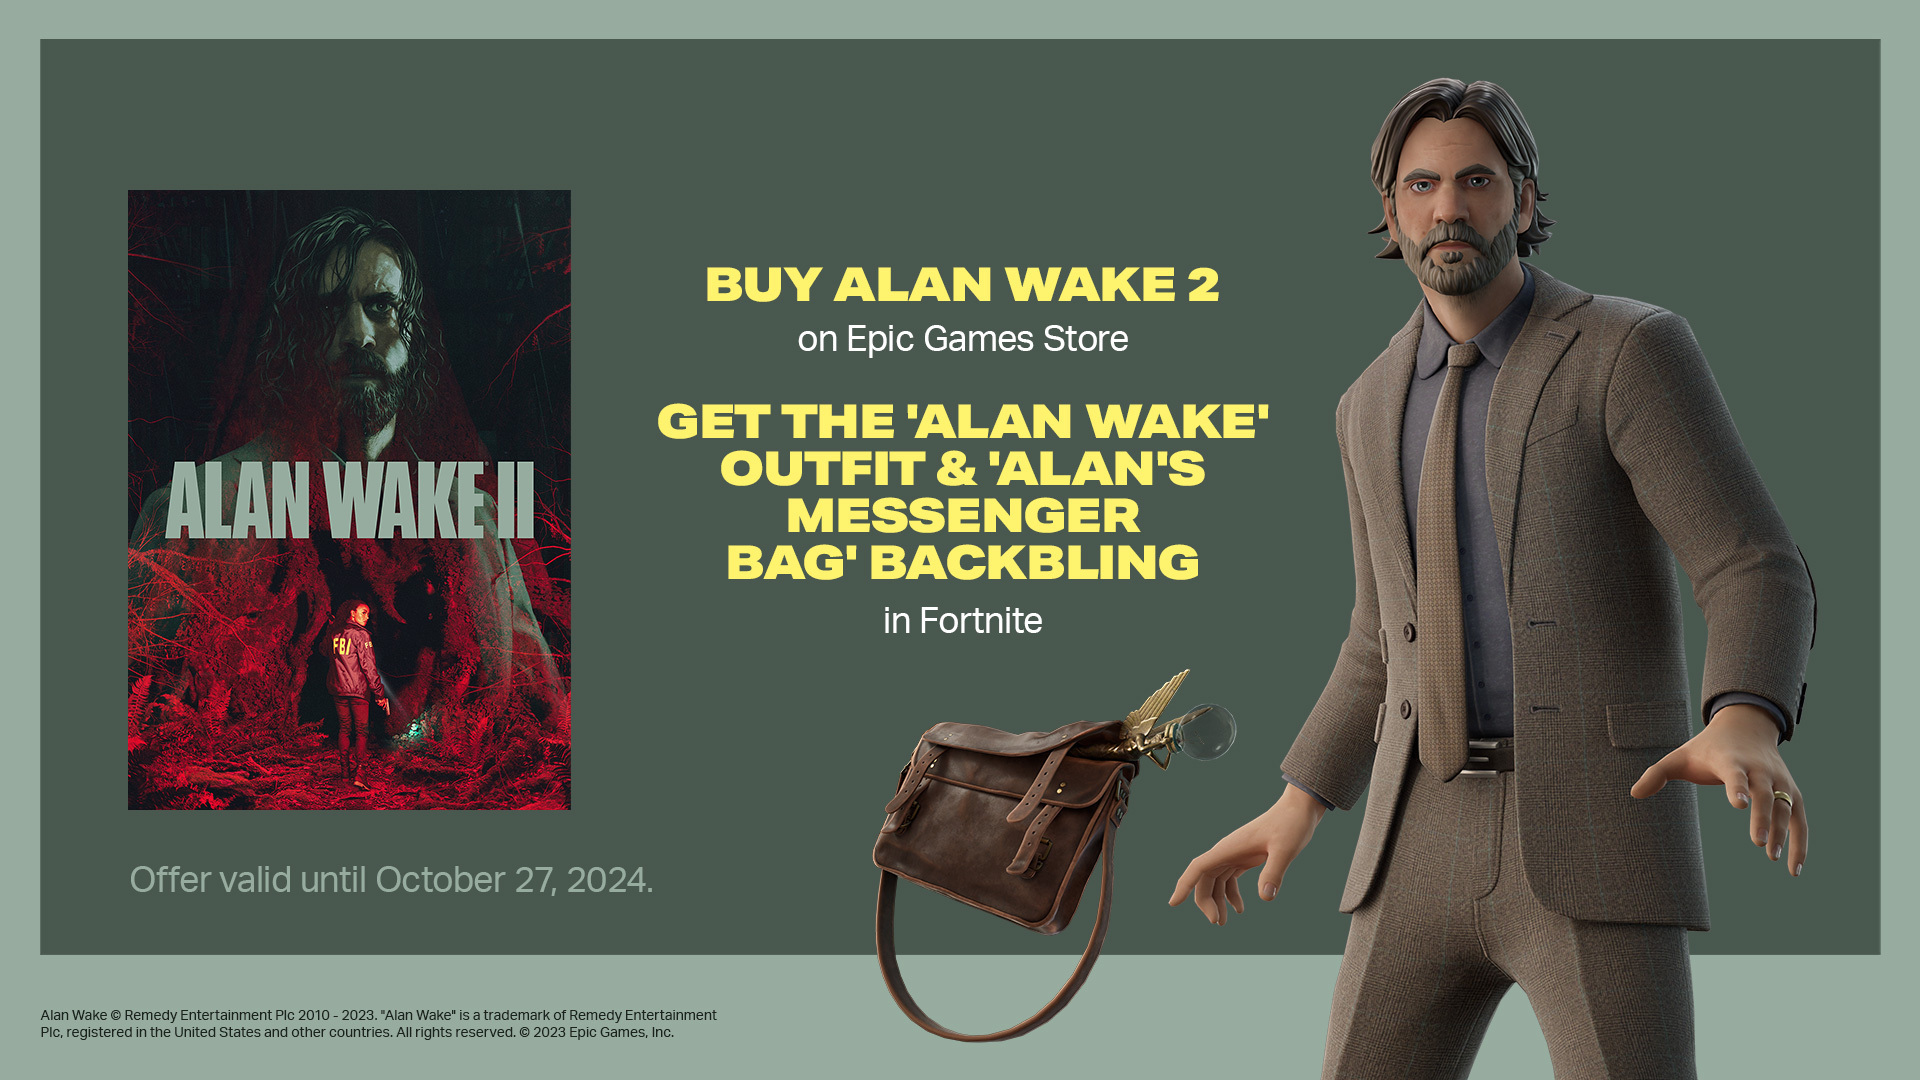 Alan Wake 2 on X: If you buy Alan Wake 2 on the Epic Games Store